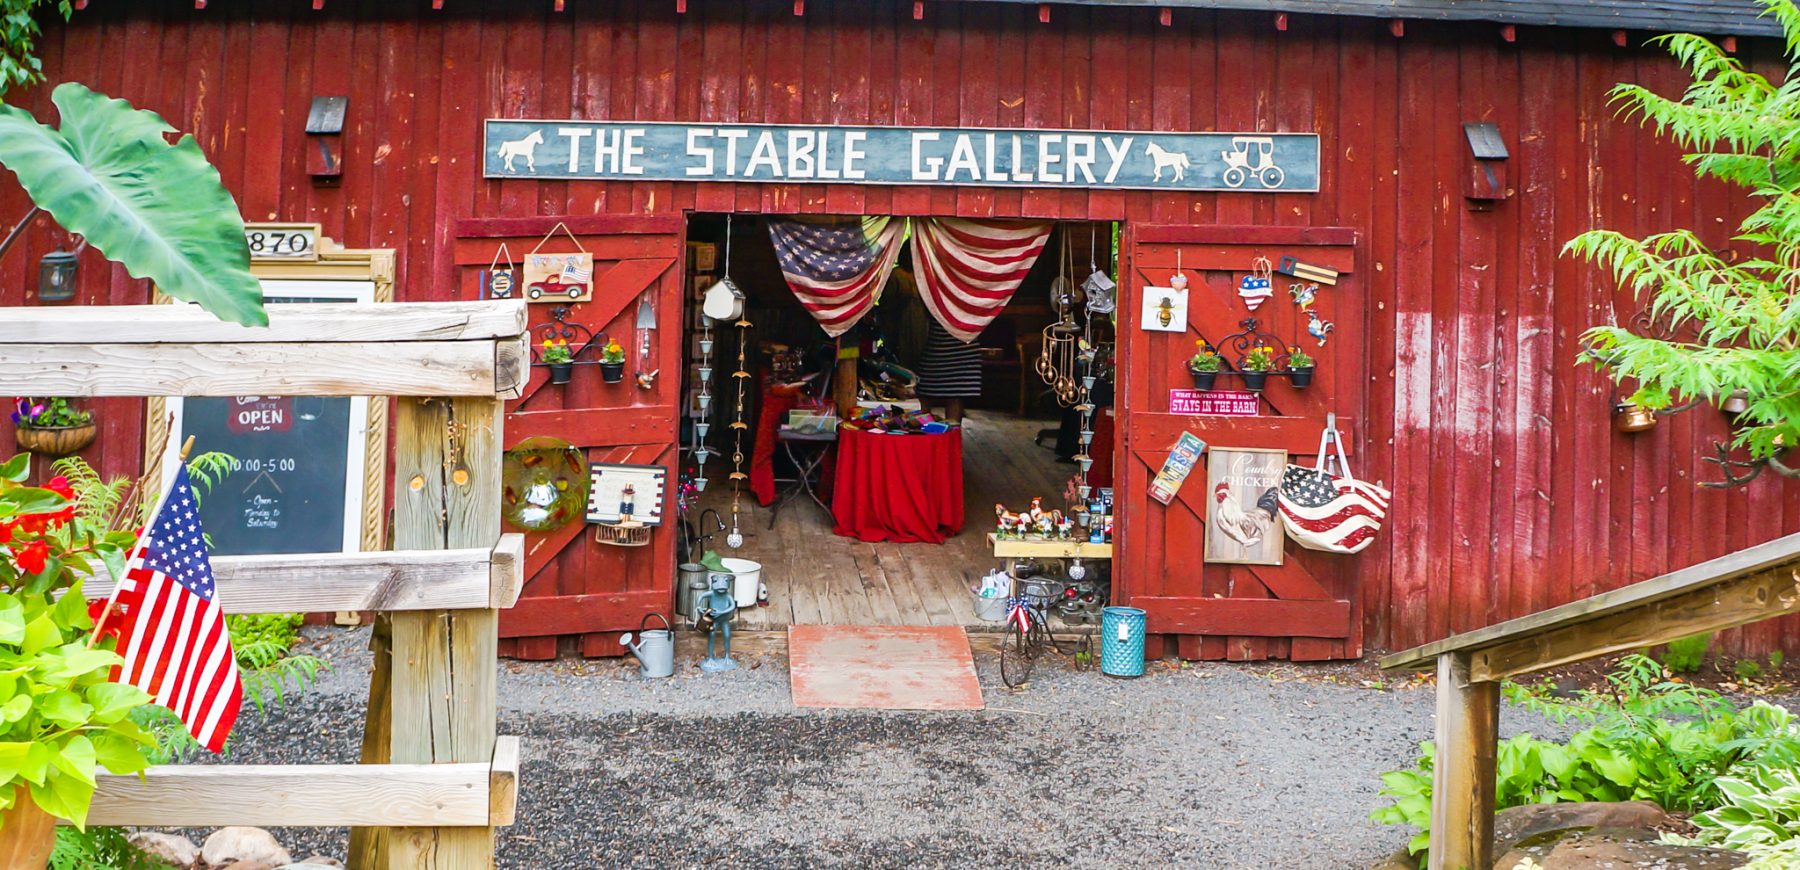 Stable Gallery (5)